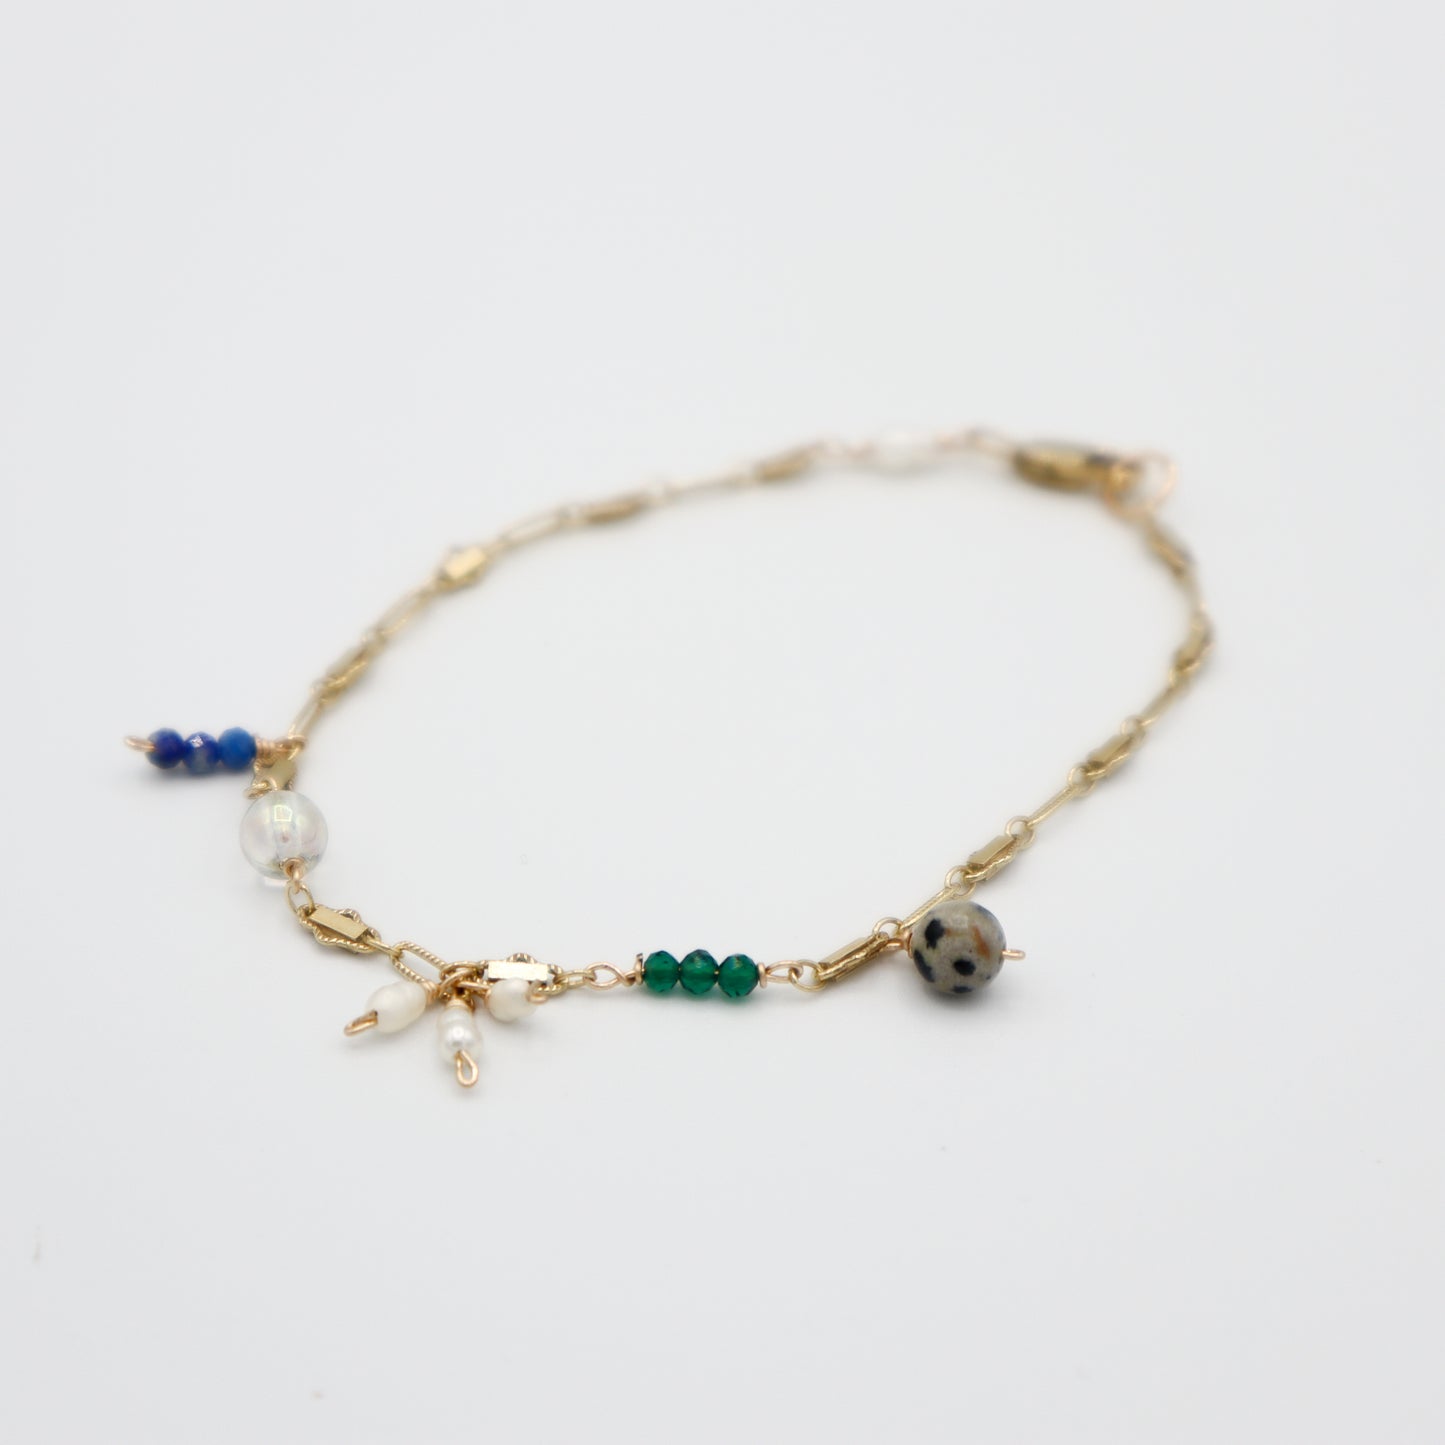 Roop Jewelry Sprinkle Bracelet. Lapis lazuli, emerald, dalmation stone, and pearl jewelry handmade in Oakland, Ca.